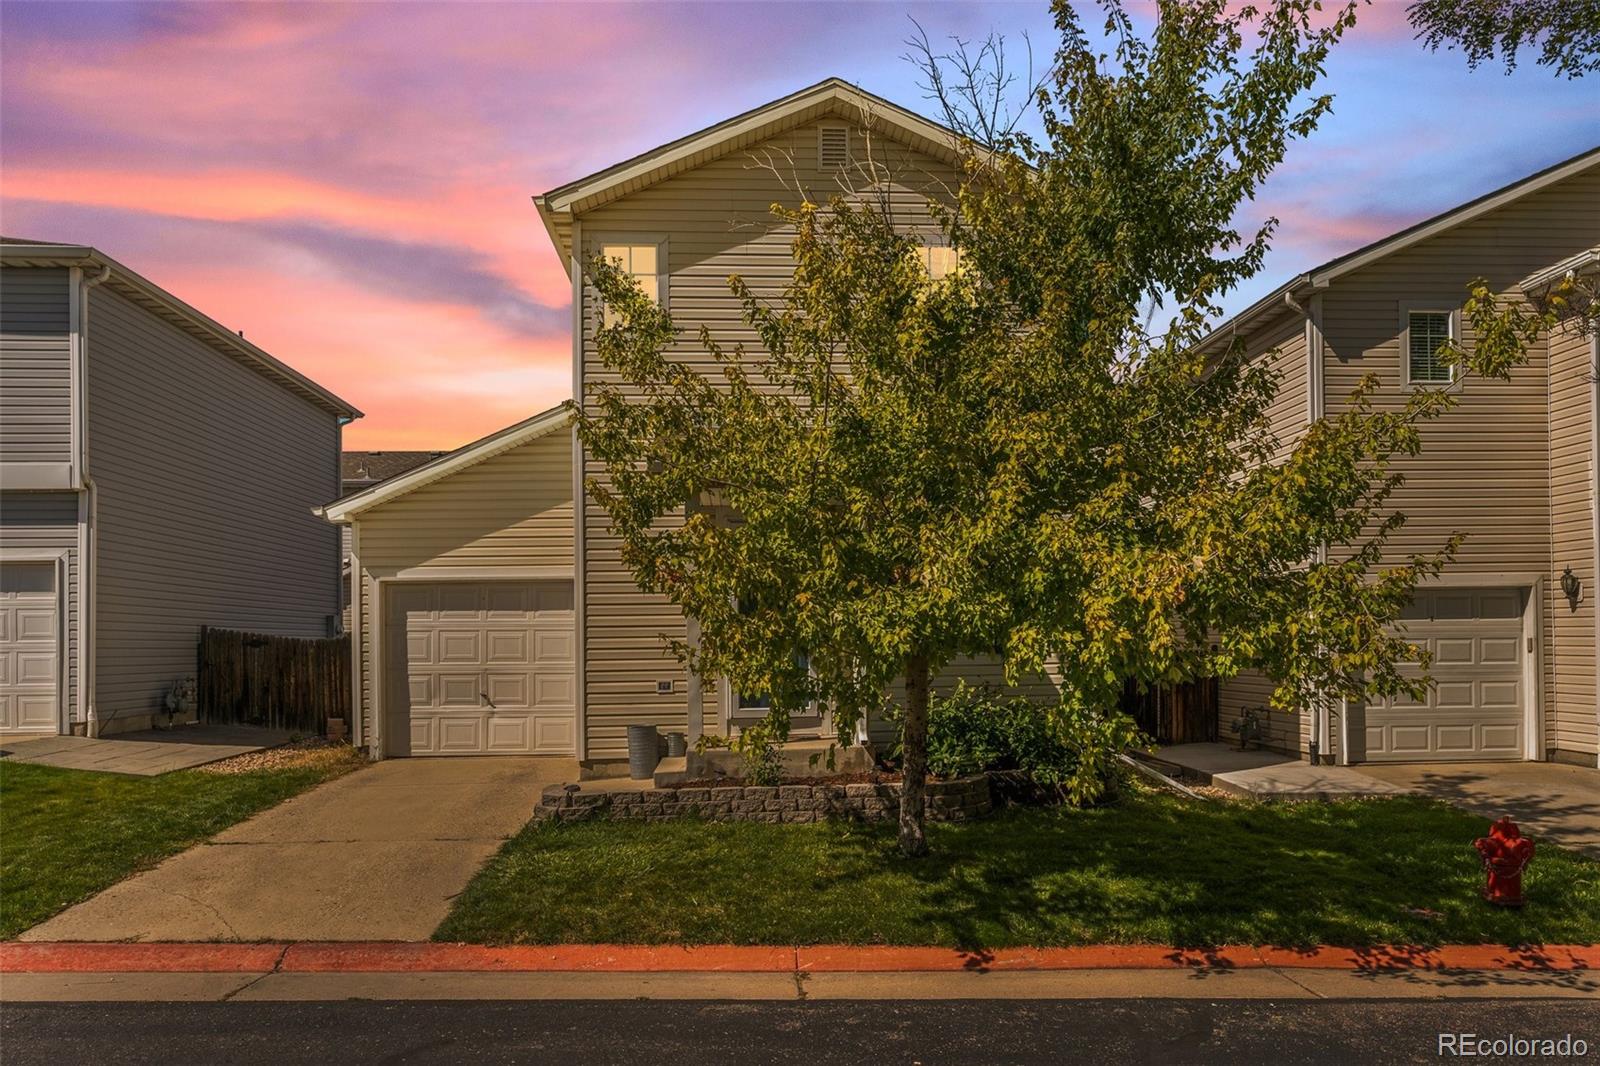 Report Image for 8869  Lowell Way,Westminster, Colorado